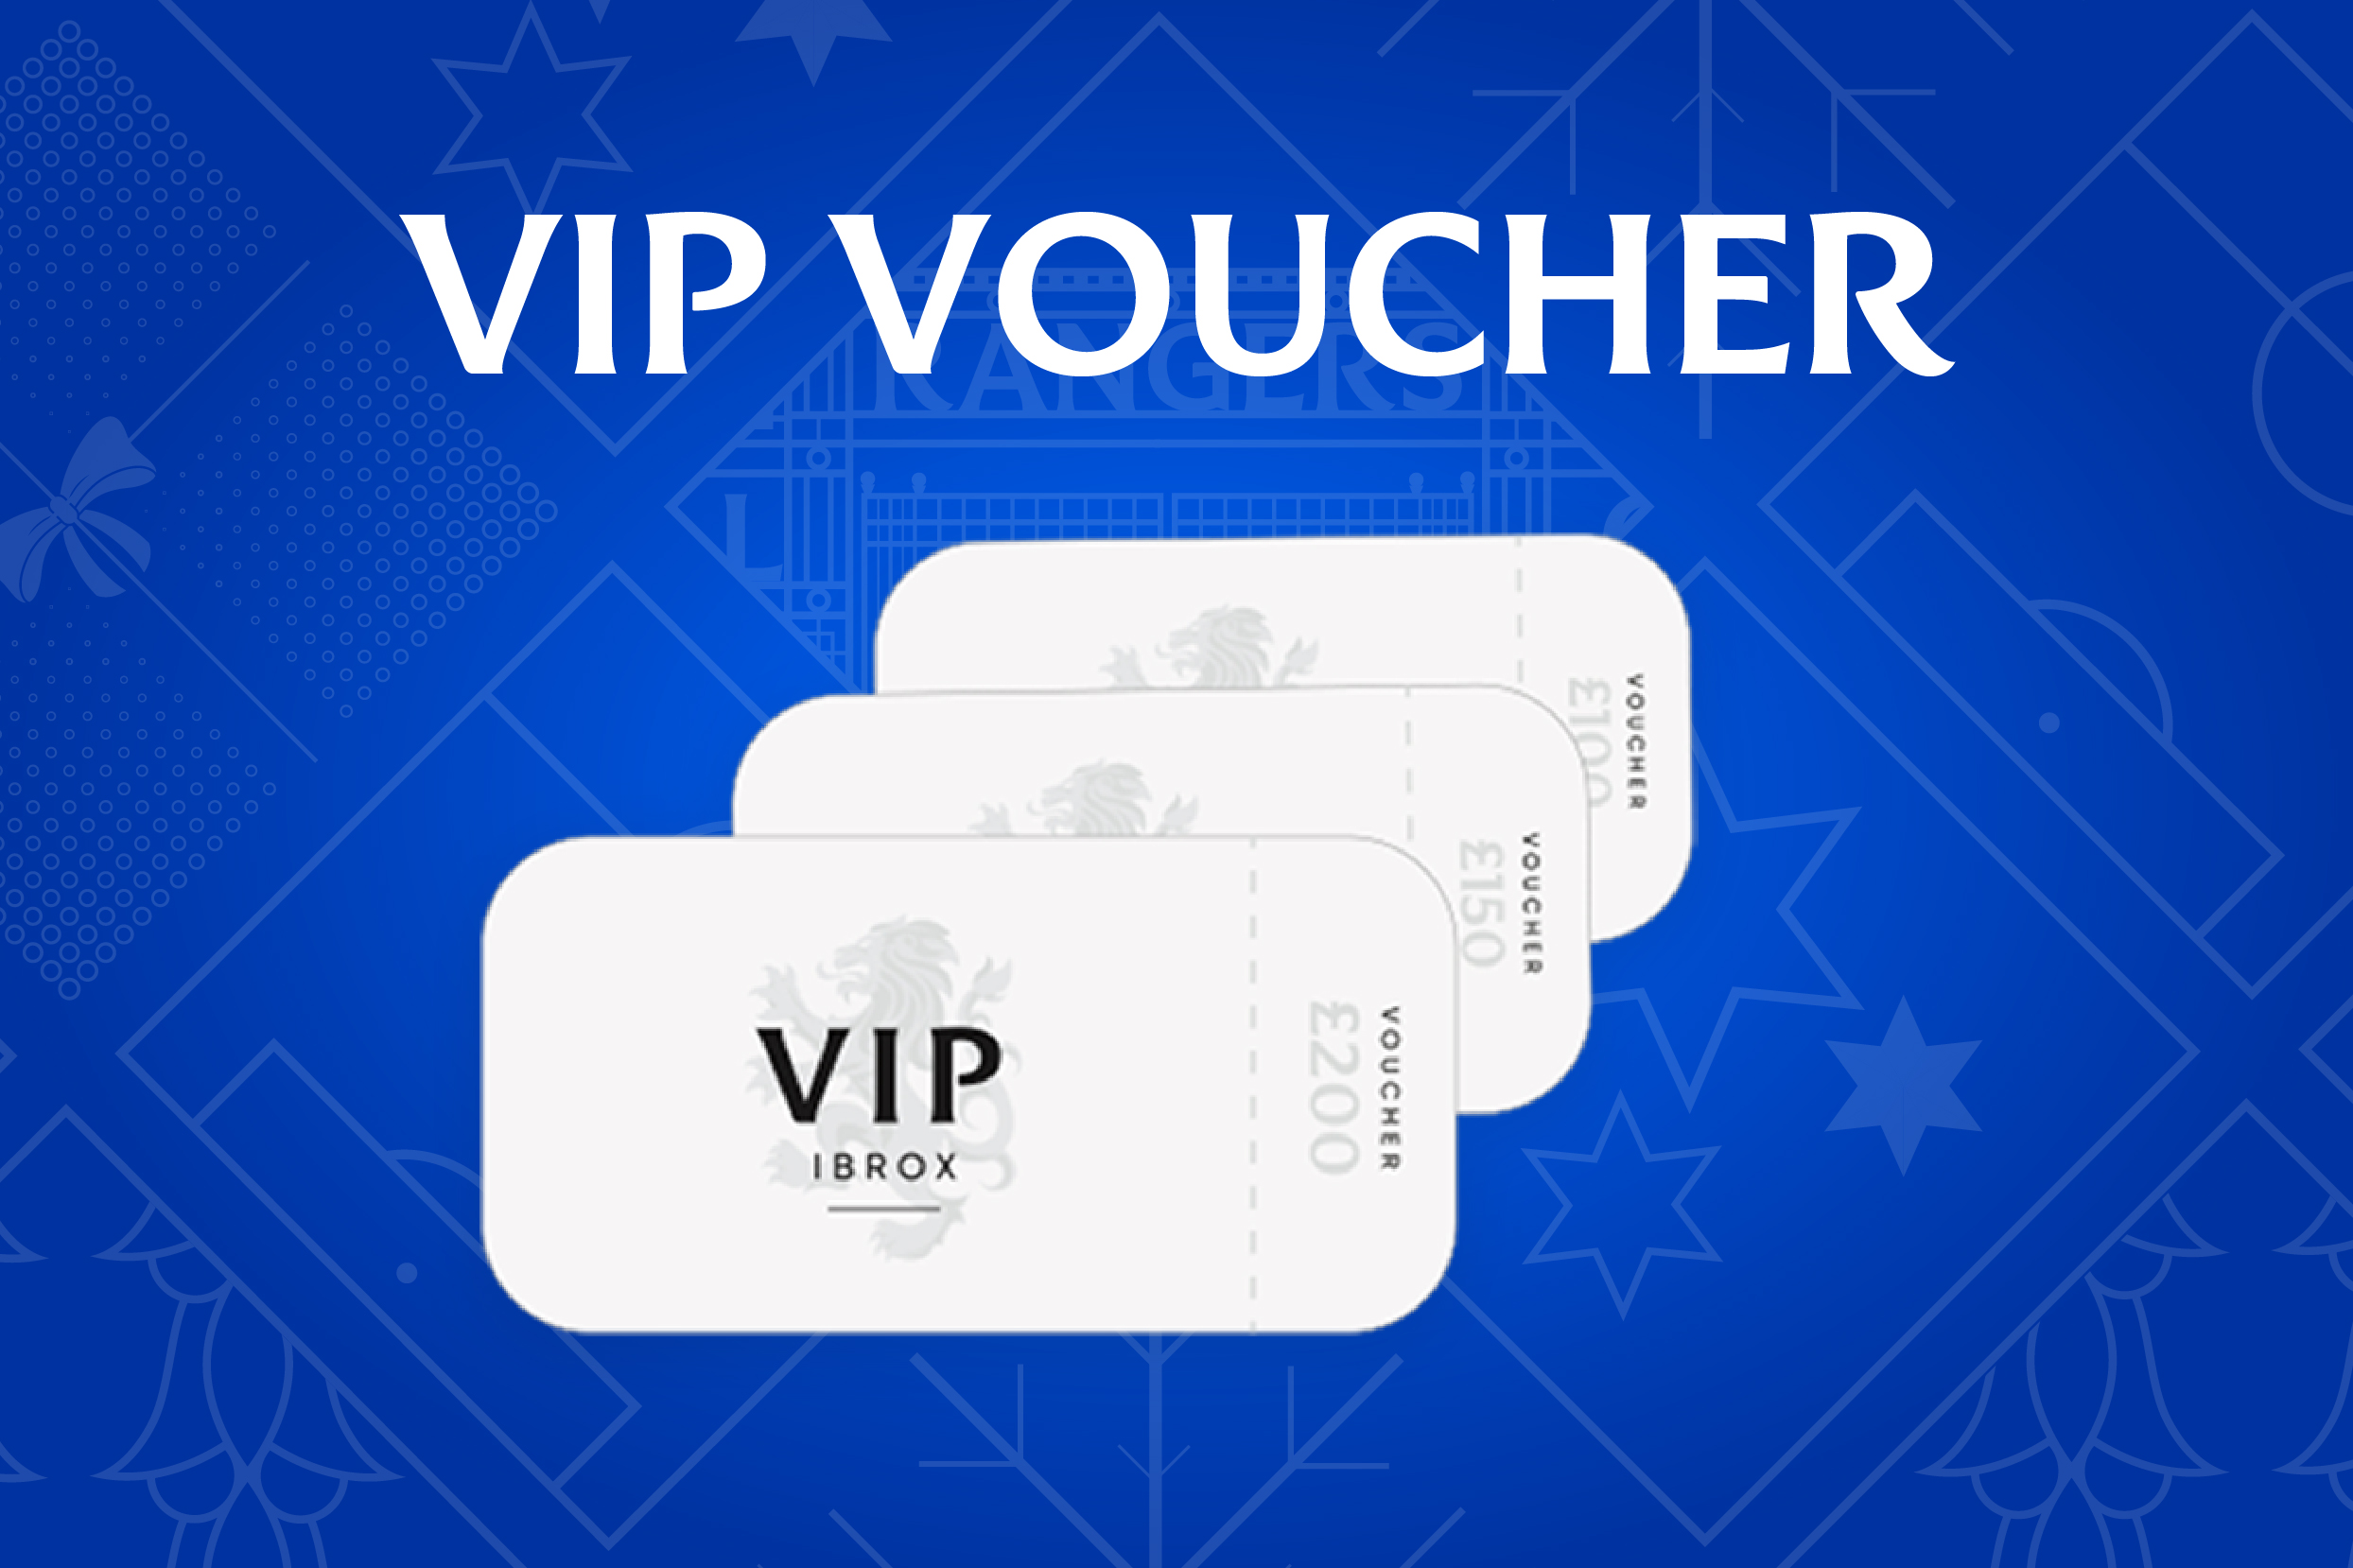 •	The Rangers VIP Hospitality e-Gift Vouchers can be redeemed by booking online at https://hospitality.rangers.co.uk/. Rangers VIP e-Gift Vouchers can only be redeemed against the purchase of Hospitality Packages which are subject to availability at the time of booking.

•	If the price of any Hospitality Packages purchased using an Rangers VIP e-Gift Voucher is less than the balance on the Rangers VIP e-Gift Voucher, the unused balance will be carried over and can be used towards purchases of Hospitality Packages at a later date.

•	If your purchase amount exceeds the balance on the Rangers VIP e-Gift Voucher, the remaining amount must be paid by debit or credit card

•	Rangers VIP e-Gift Vouchers and/or any unused balance cannot be redeemed or exchanged for cash.

•	Refunds will not be given for the purchase of an Rangers VIP e-Gift Voucher

•	Rangers VIP e-Gift Vouchers, and any unused balance, will expire twelve (12) months from the date on which the Rangers VIP e-Gift Voucher was purchased. 

•	Rangers is not responsible for lost or stolen Rangers VIP e-Gift Vouchers. The Rangers VIP e-Gift Vouchers can be used by anyone in possession of the Rangers VIP e-Gift Voucher and Rangers personnel are not obliged to check the identity of a person using the Rangers VIP e-Gift Voucher. Rangers VIP e-Gift Vouchers will not be replaced if lost or stolen.
